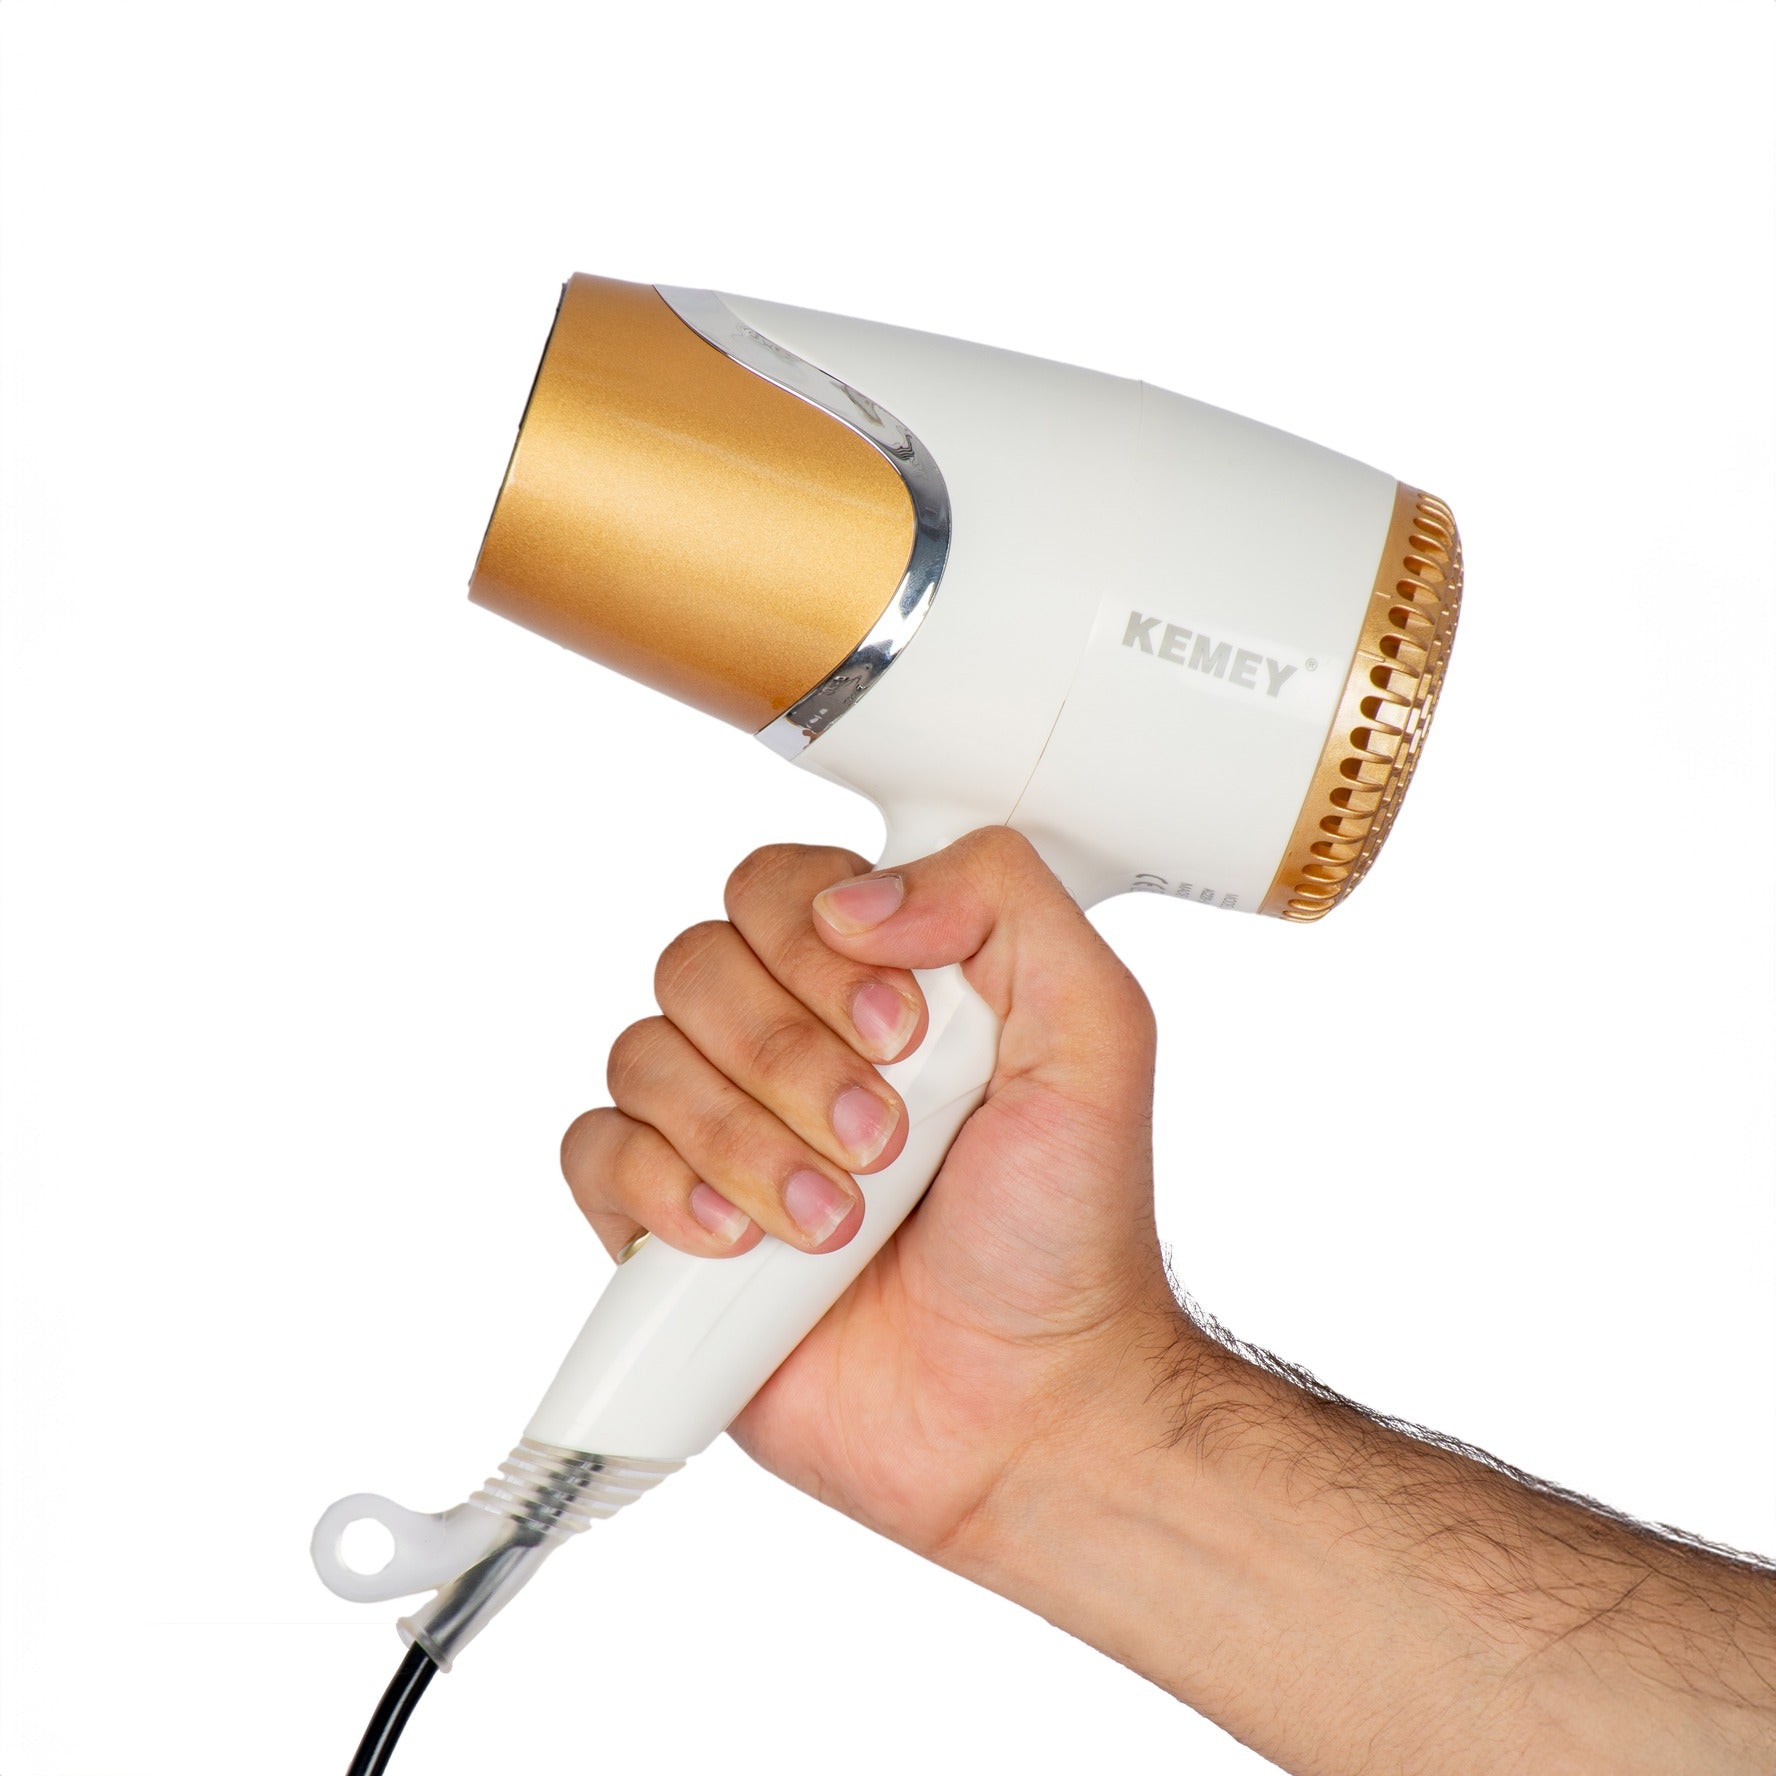 KEMEY KM-6832 Electric Foldable Travel Hair Dryer with 2 Speed Control